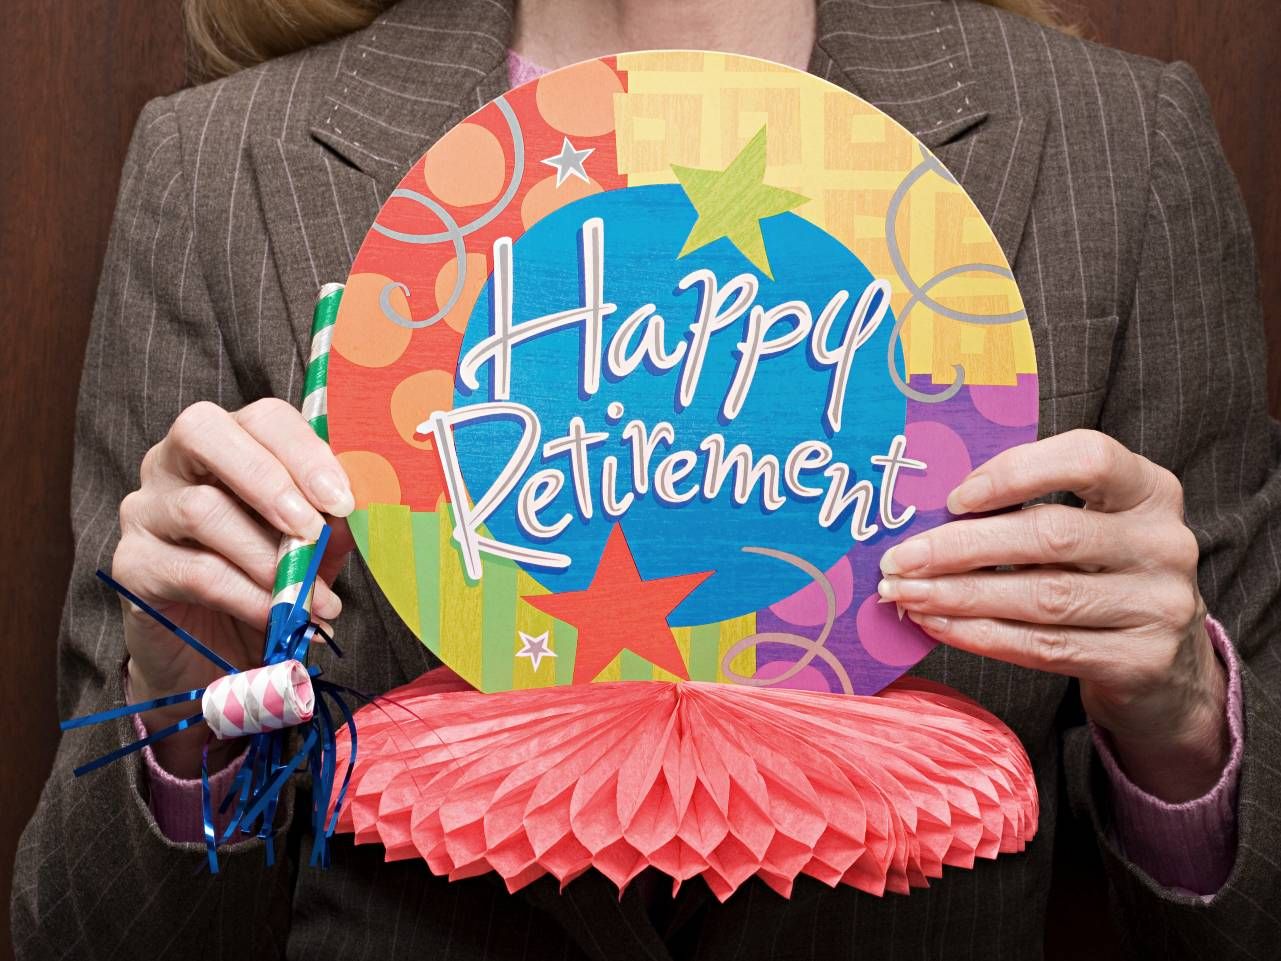 After decades of work, in retirement your main focus should be enjoying your time.